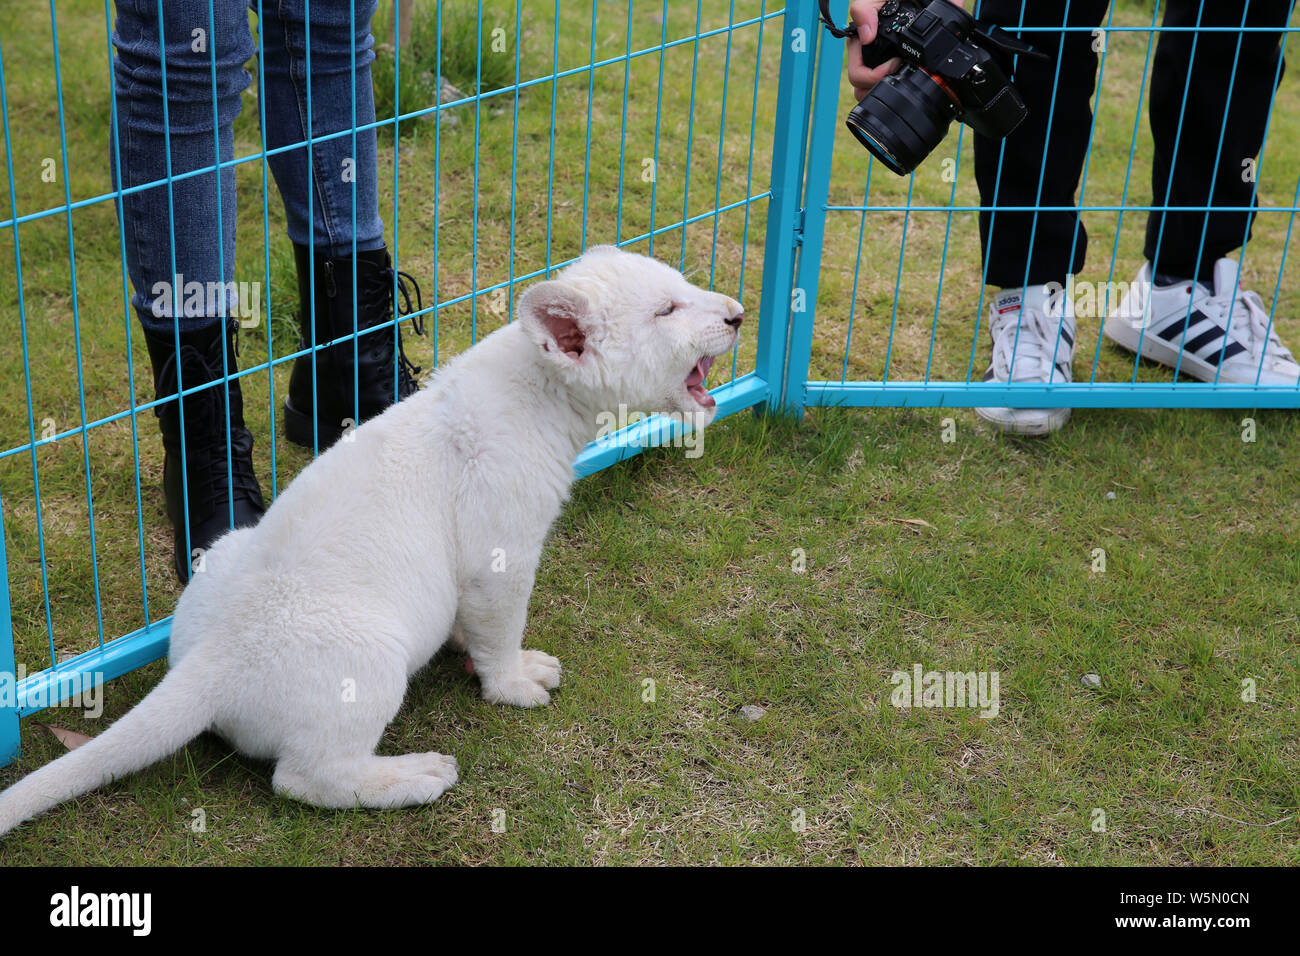 The white lion cub is pictured at the Nantong Forest Safari Park in Nantong city, east China's Jiangsu province, 4 April 2019.   The Nantong Forest Sa Stock Photo